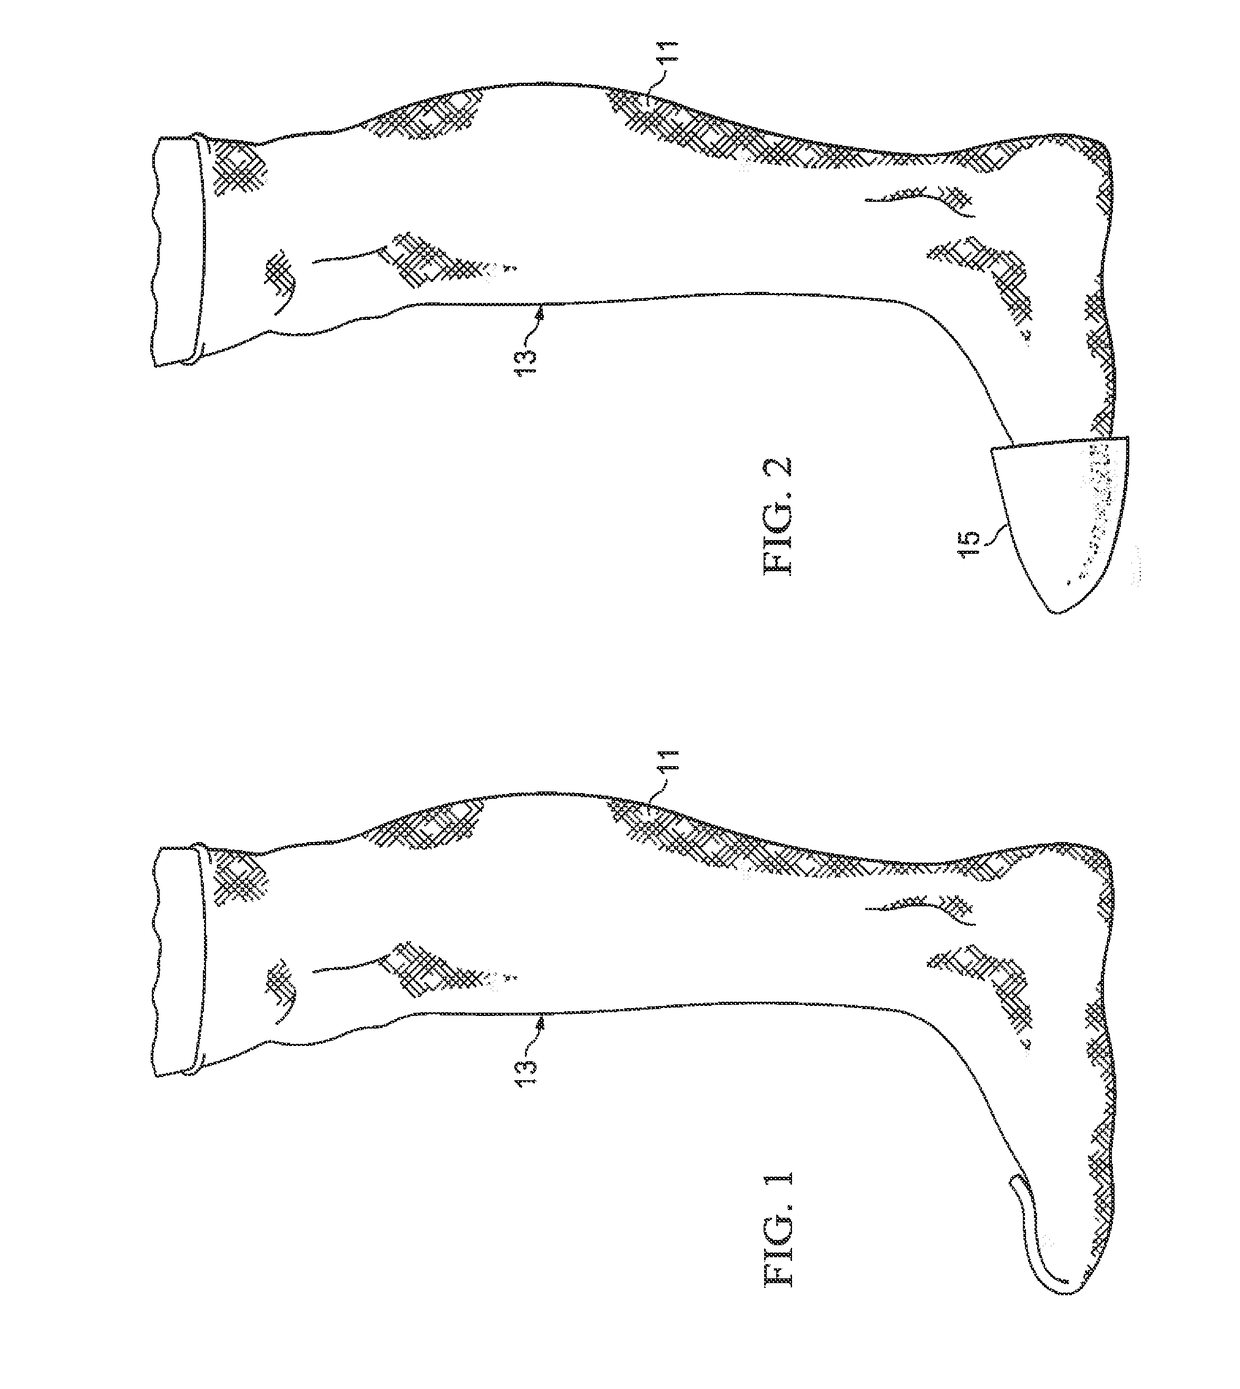 Full Contact Orthopedic Cast and Method